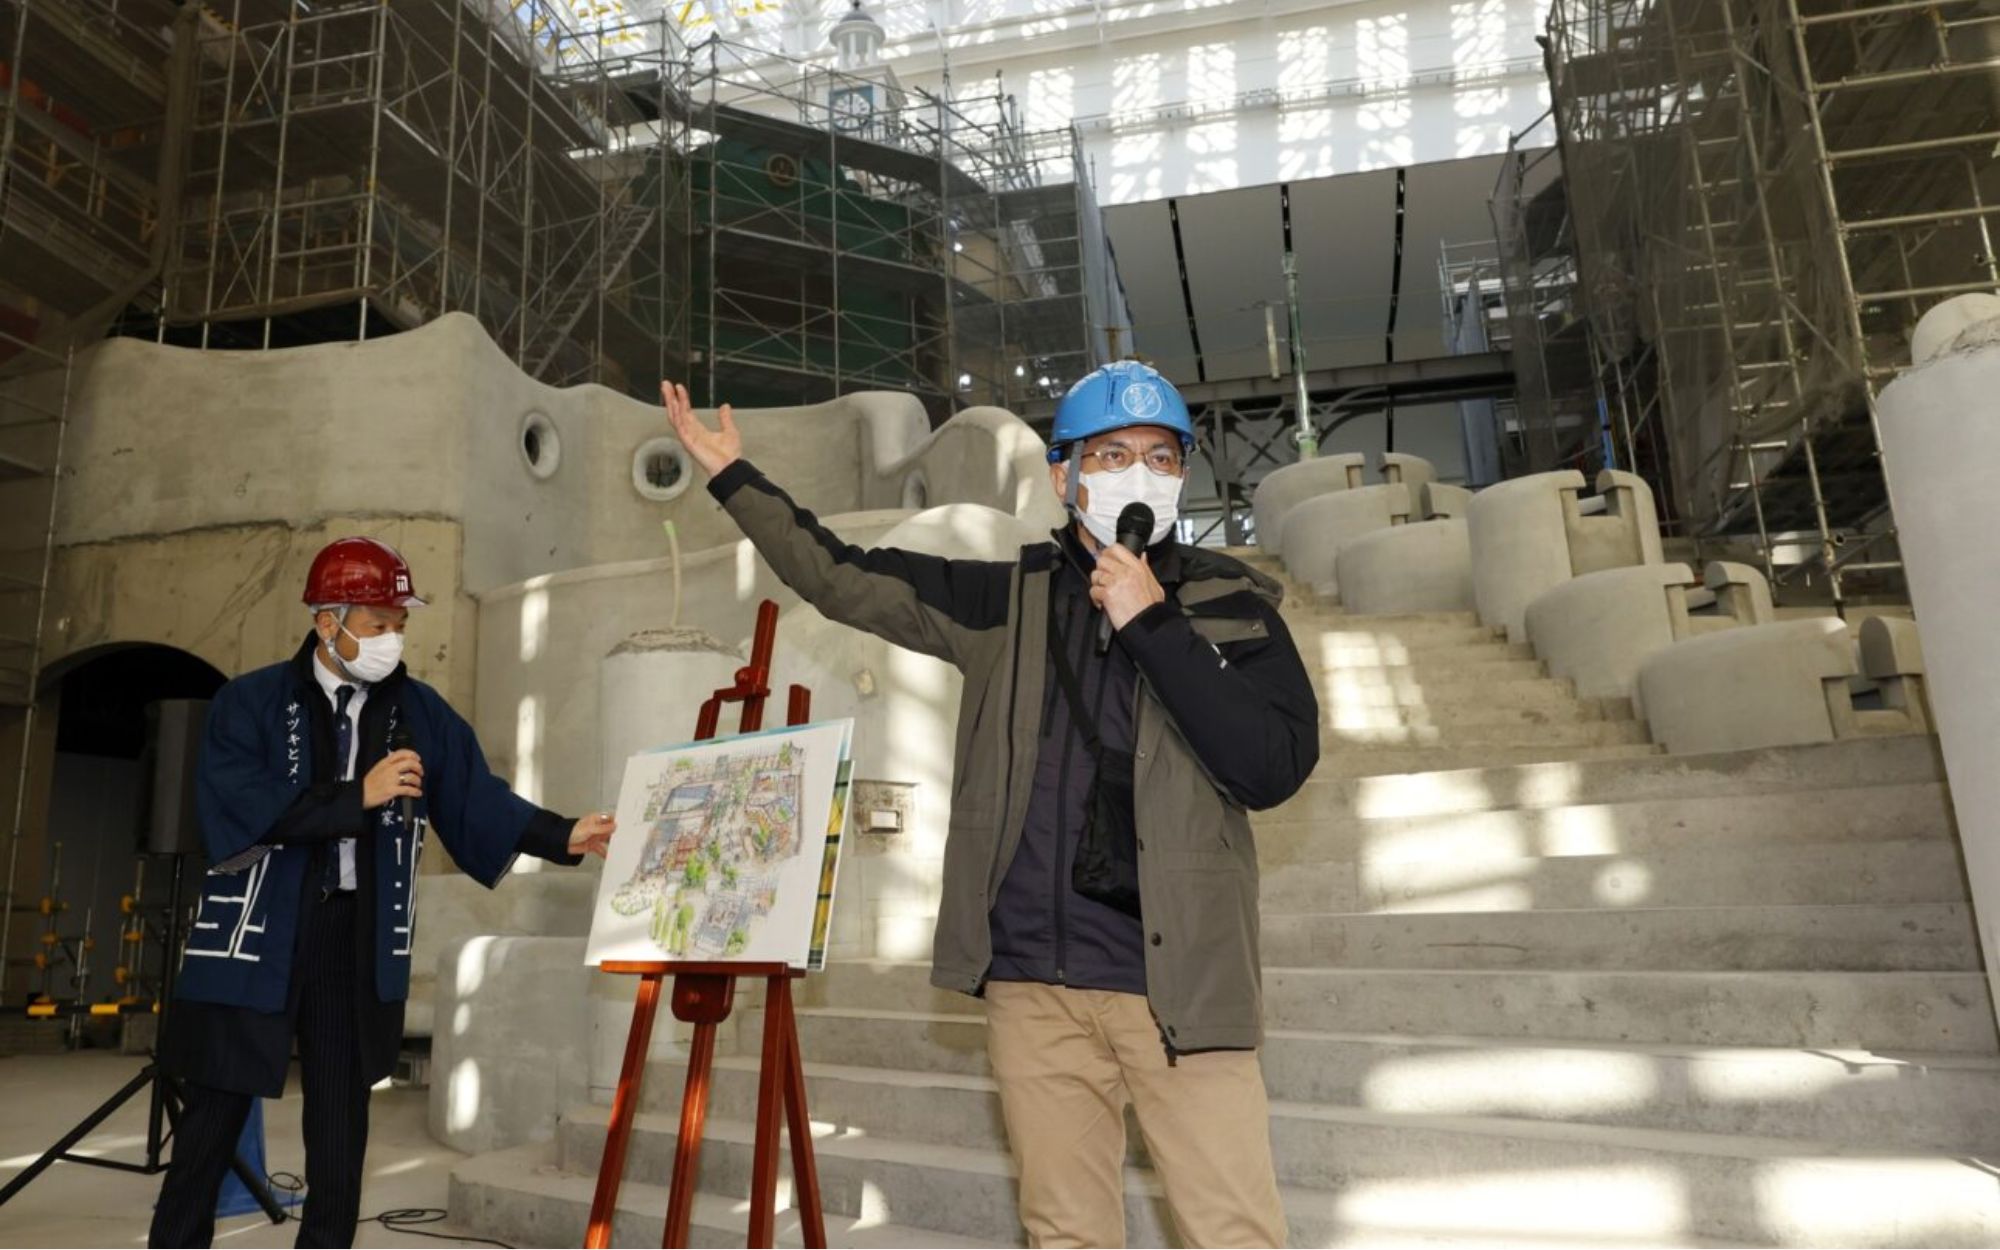 Director Goro Miyazaki first shows the construction site while wearing a blue hard hat on his head